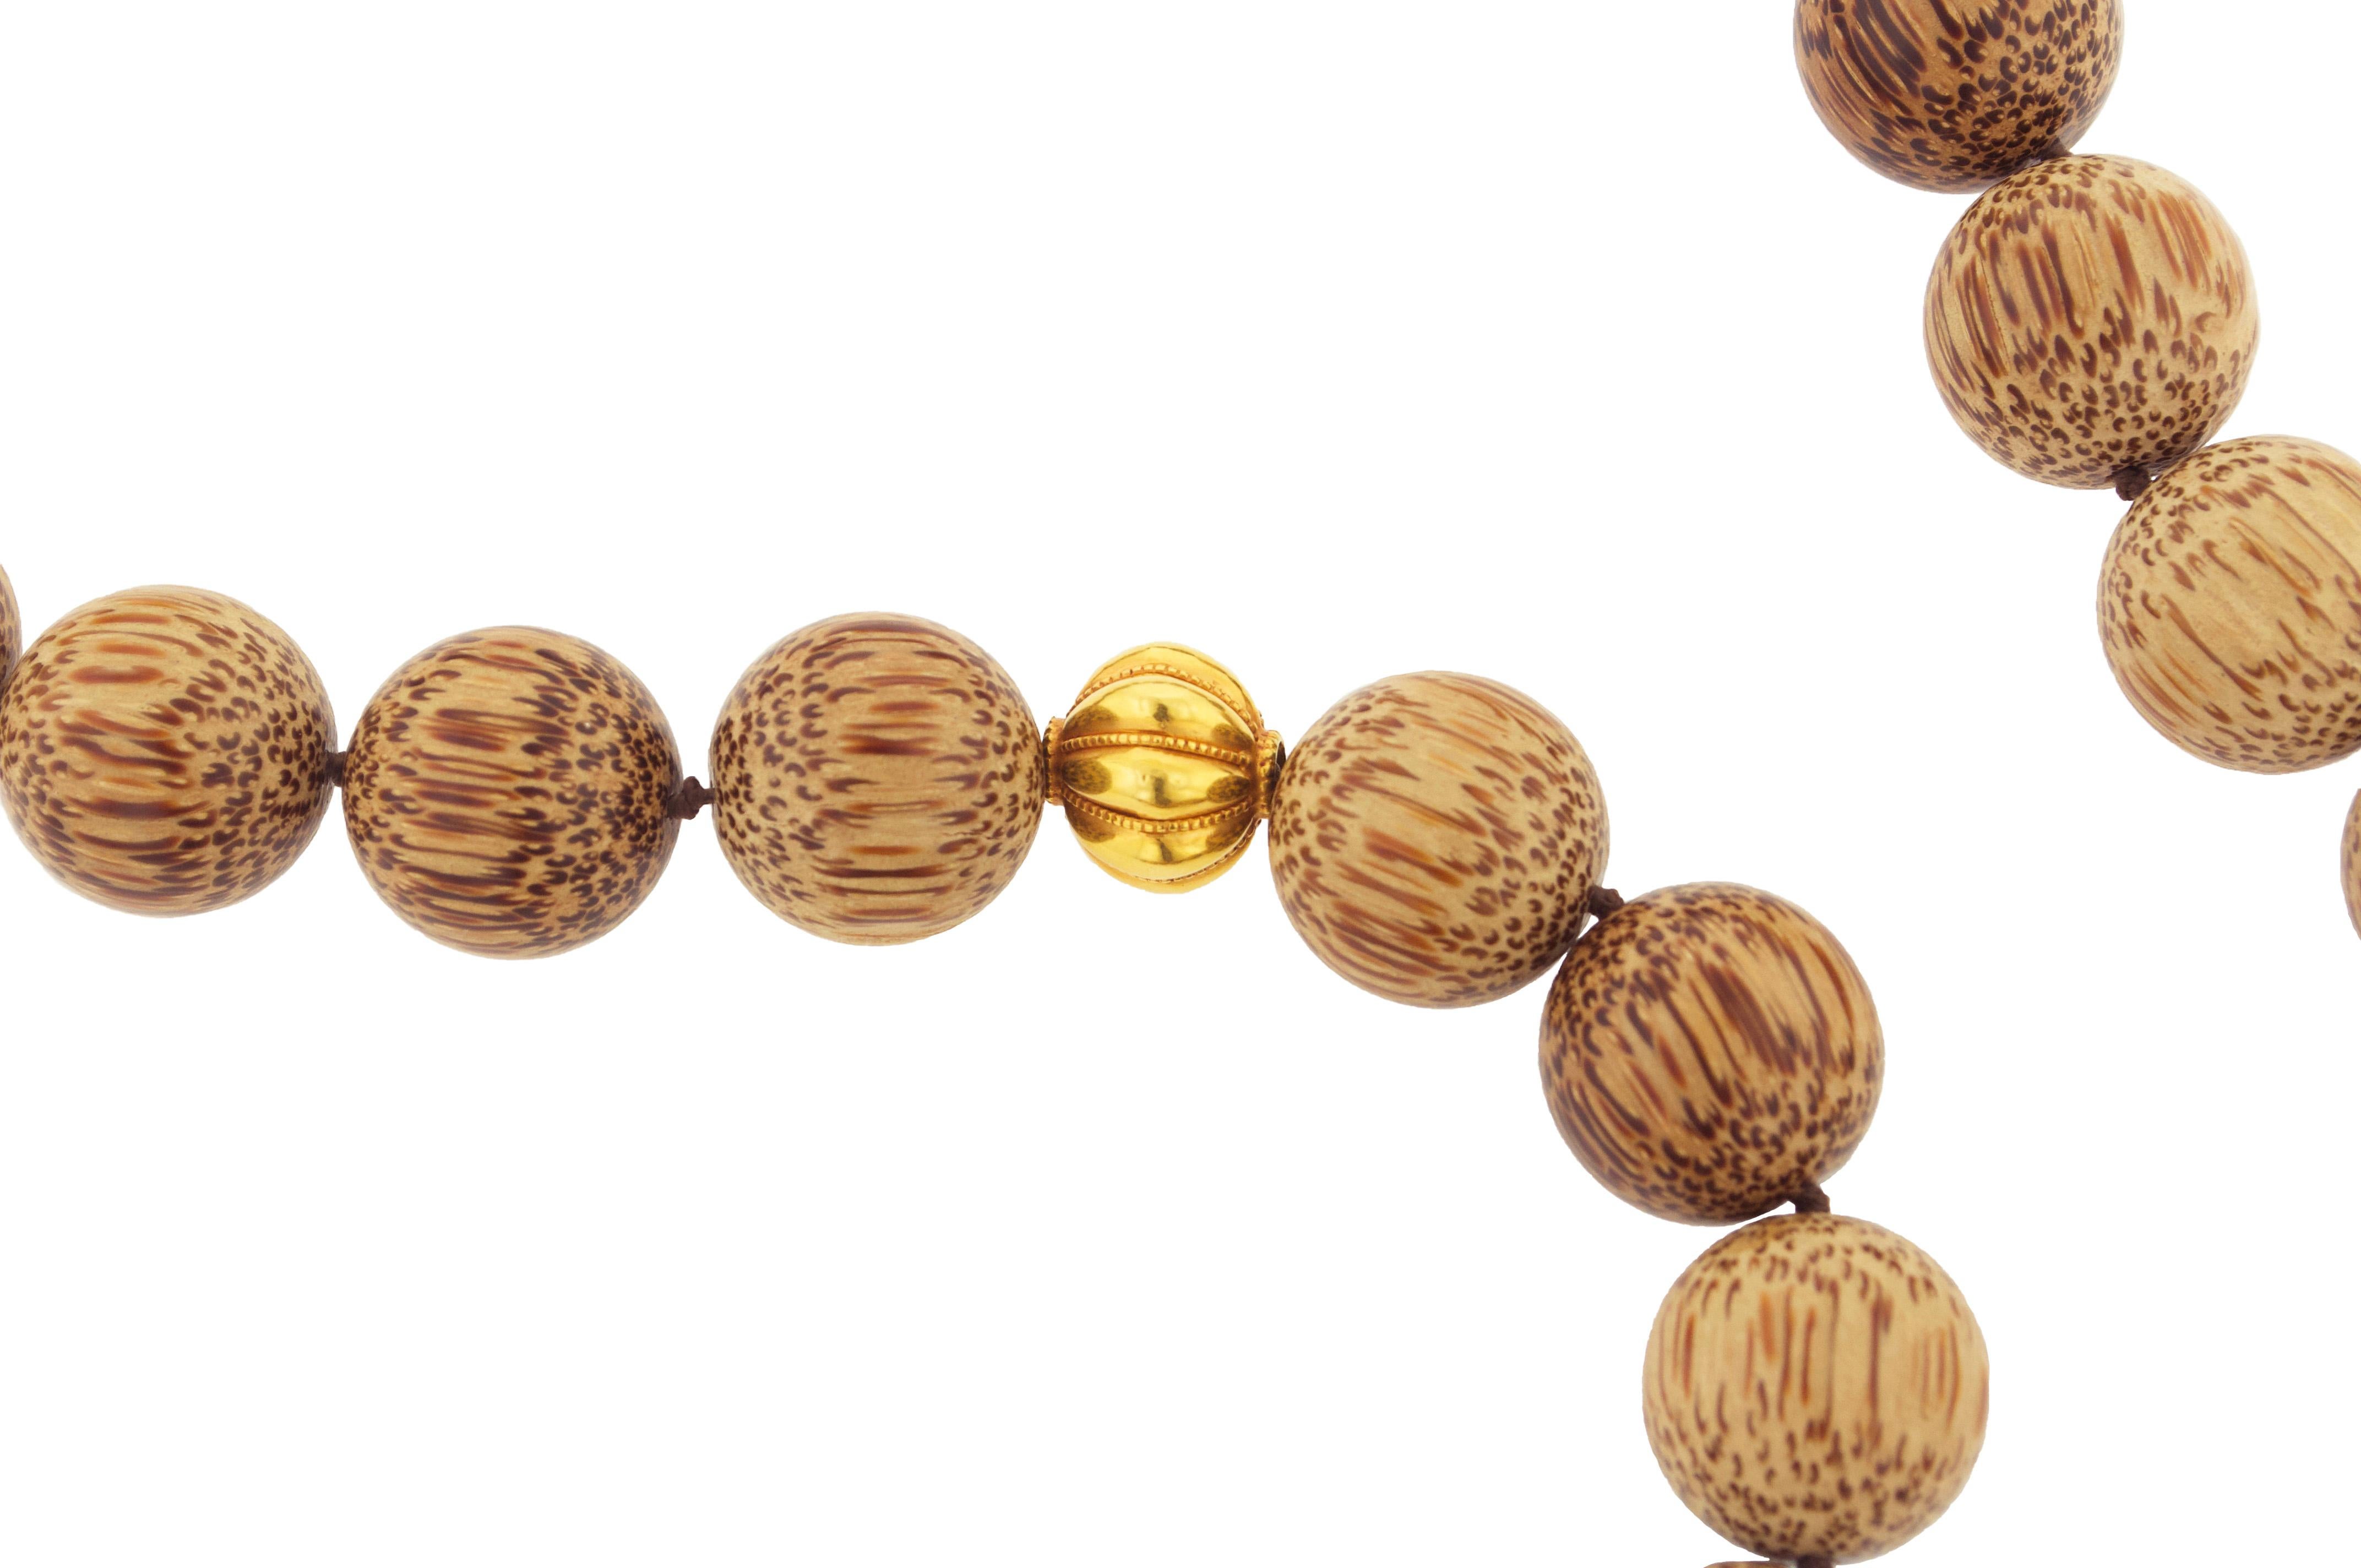 34 Palmwood Beads that each measure 20 mm

6 Gold beads: 22.74 grams

22 karat gold Indian beads

Approx. Length is 30 inches